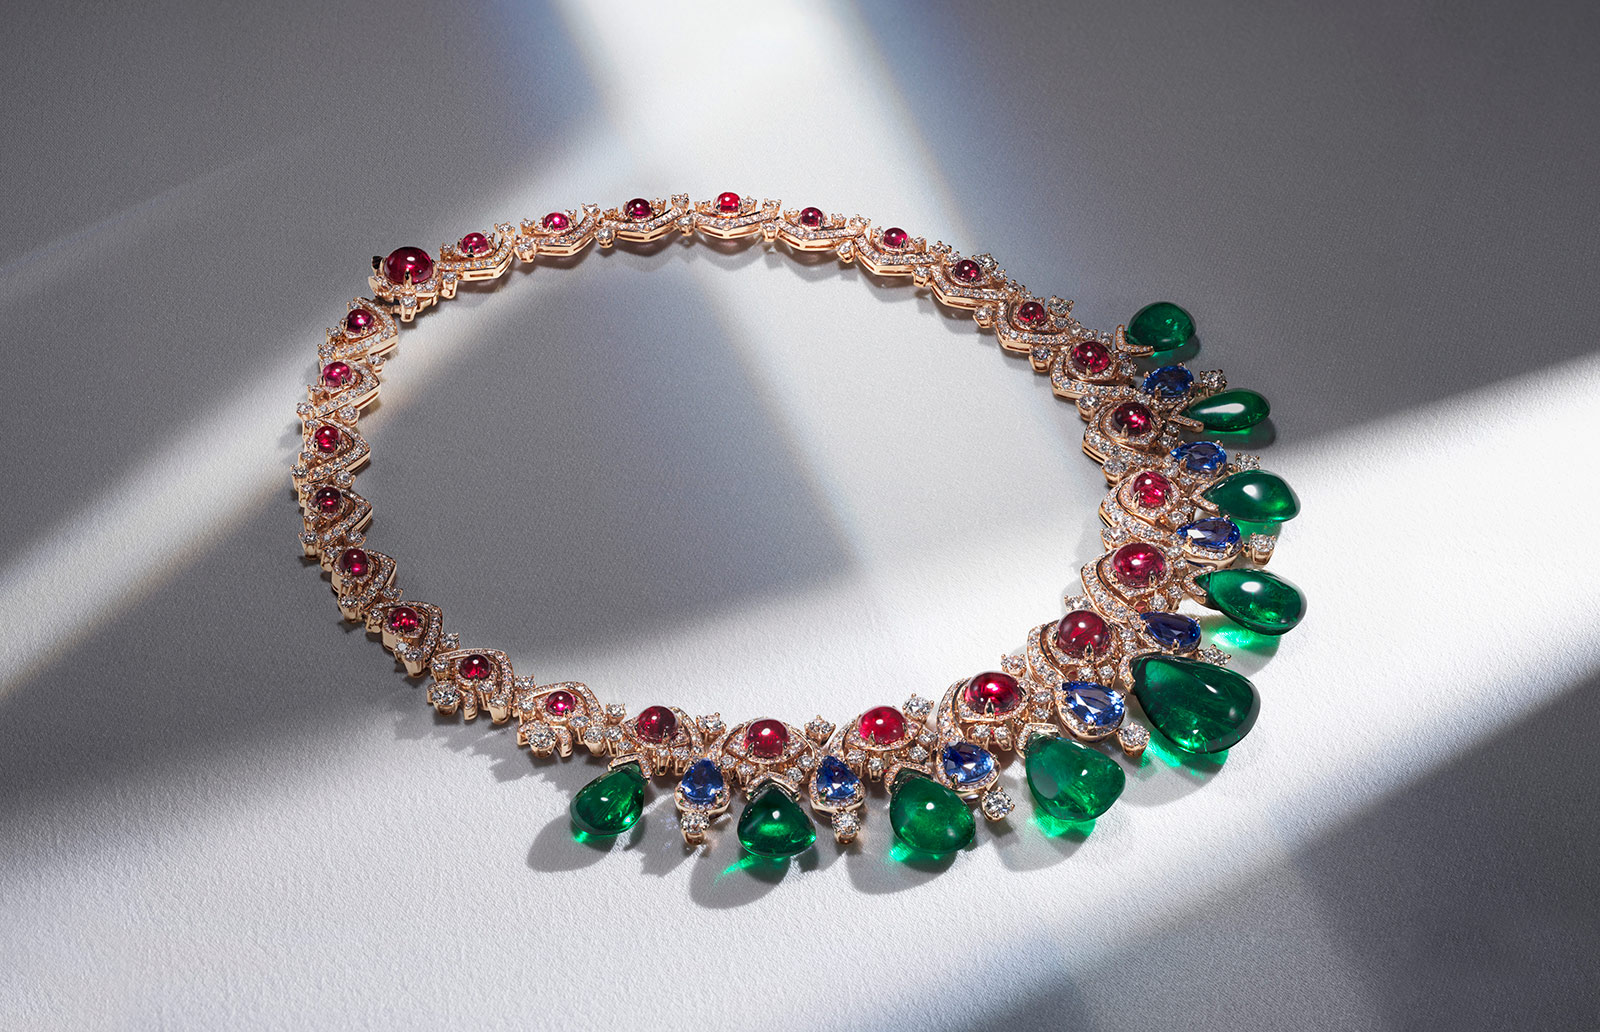 Bvlgari Cinemagia collection necklace with 104ct emeralds, sapphires, diamonds and spinels in rose gold